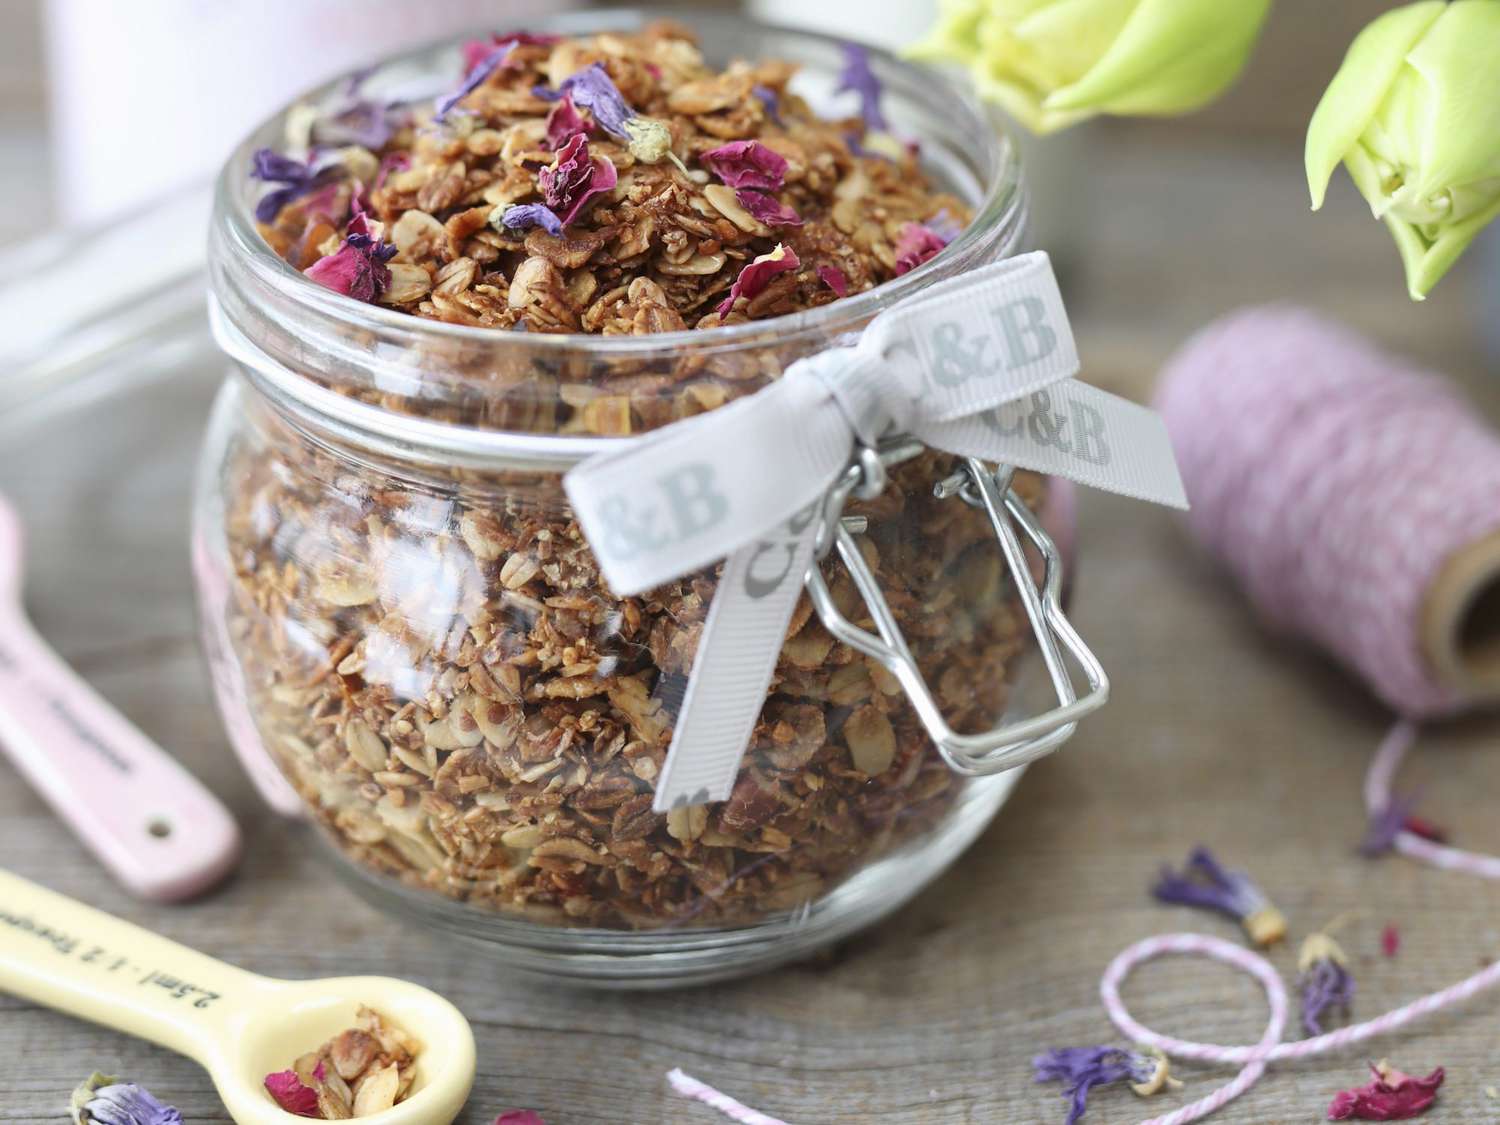 Homemade granola with coconut, sunflower and pumpkin seeds in a jar